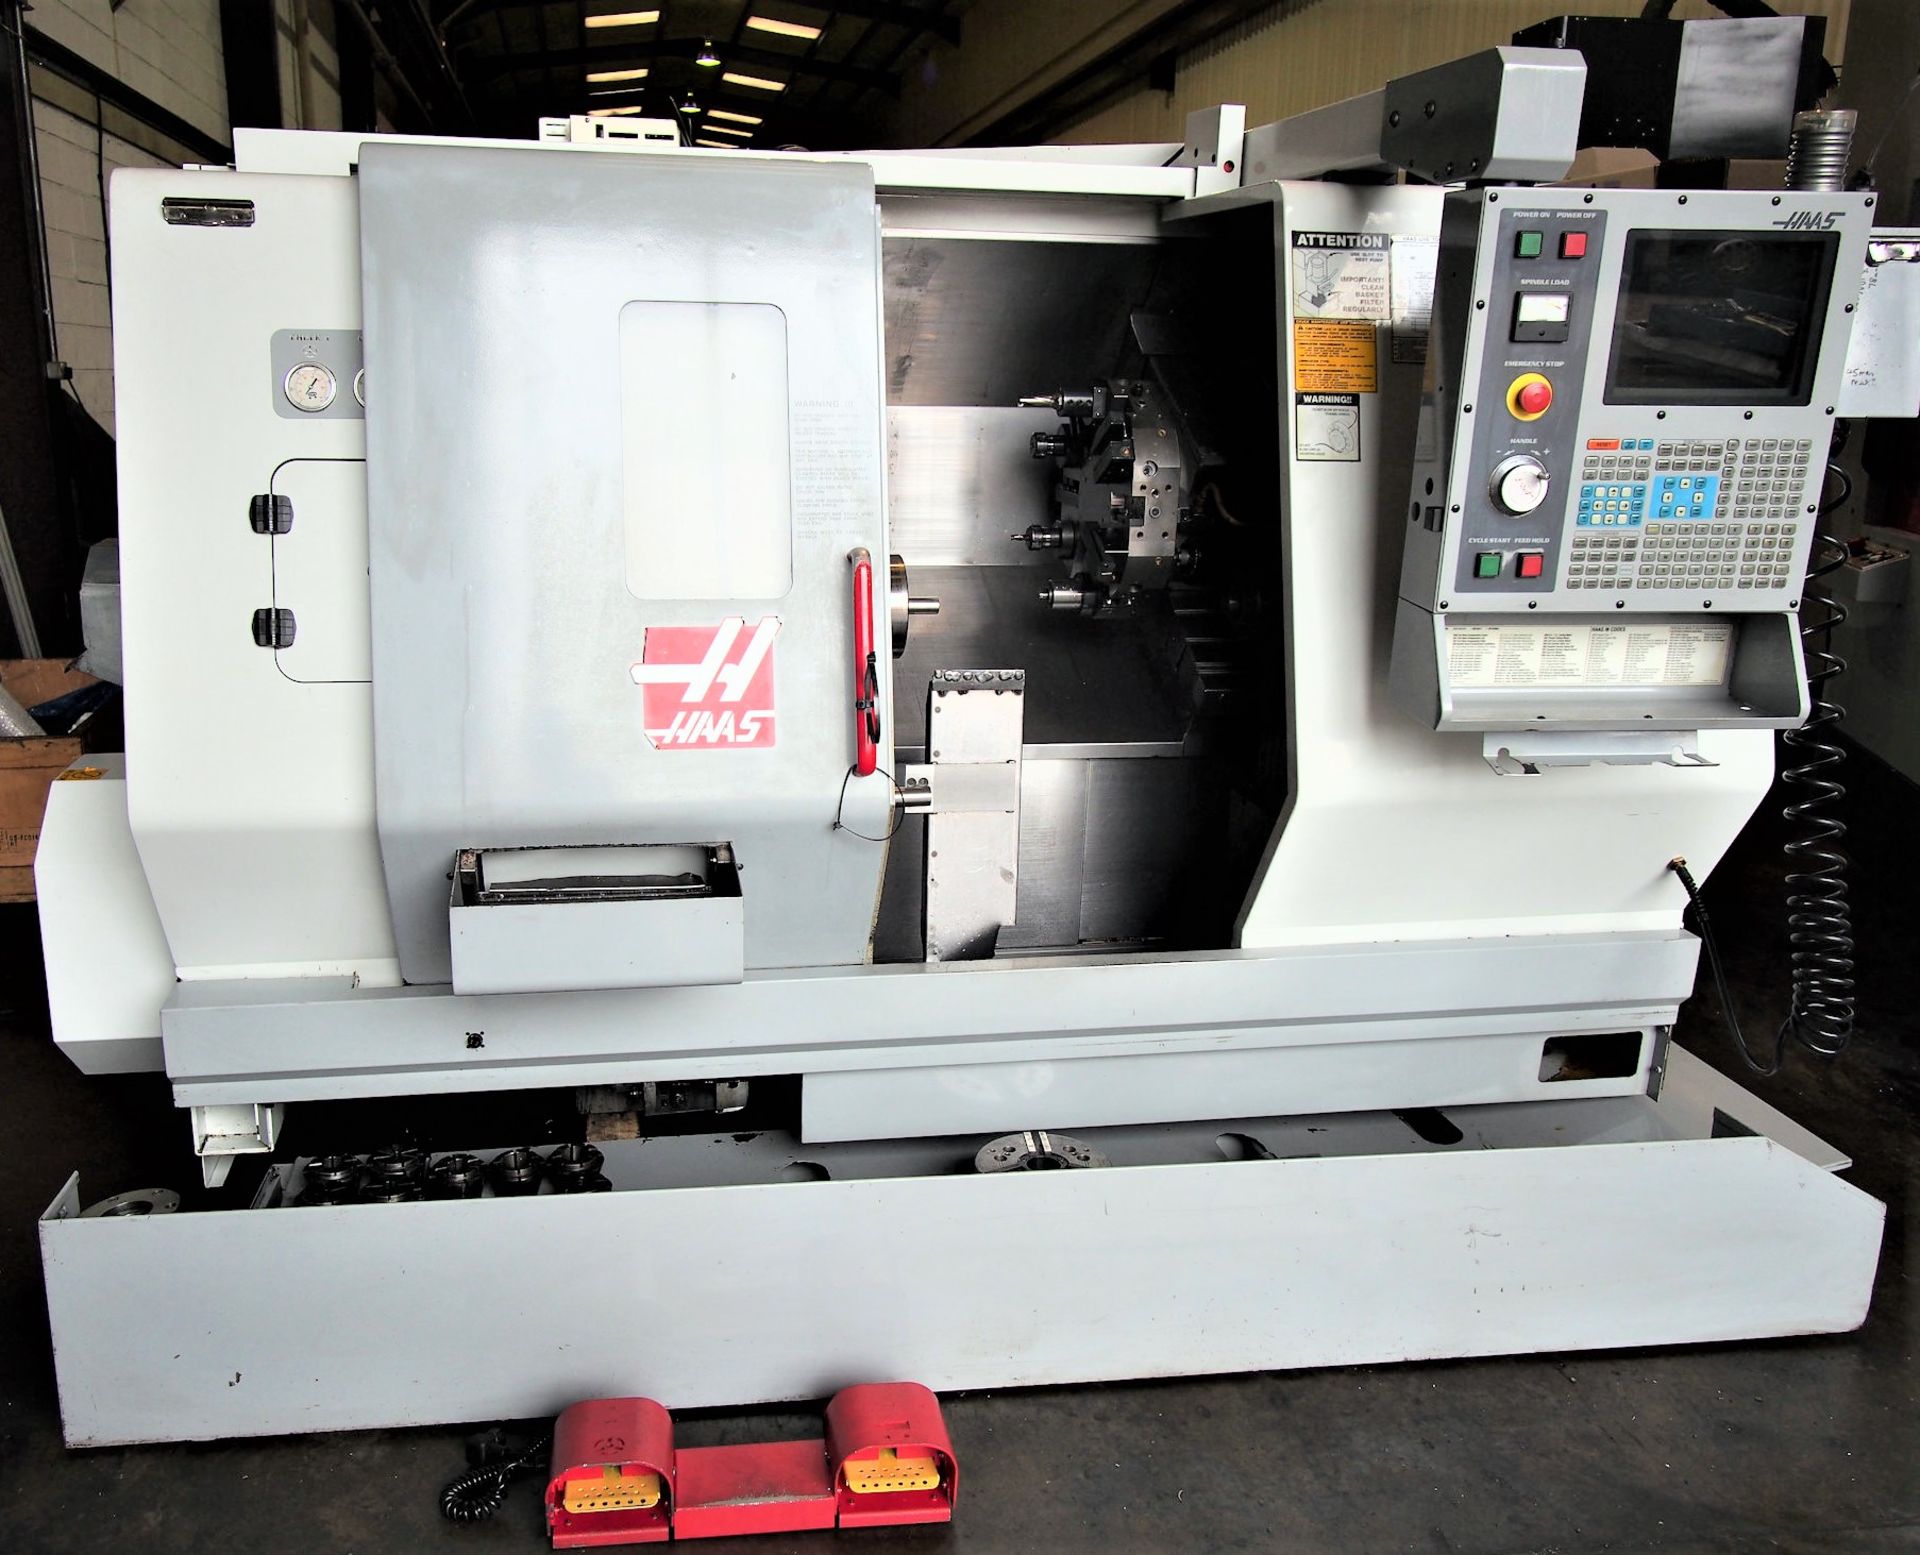 Haas TL-15 CNC Lathe, w/Sub Spindle, S/N 65304, New 2002 - Image 5 of 9